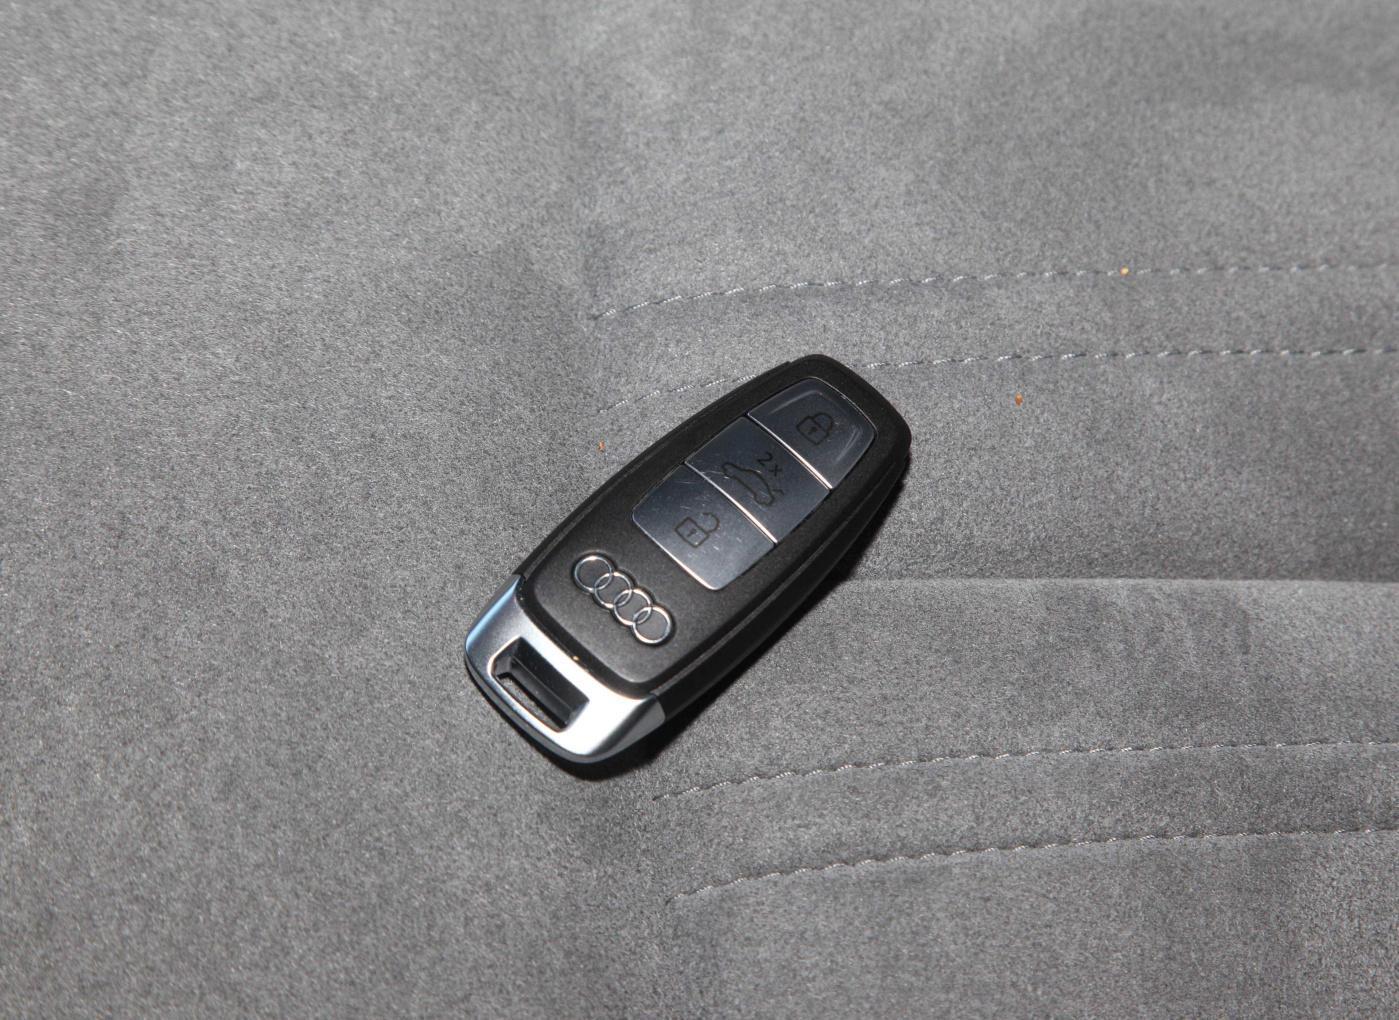 Audi A6L Fuel vehicles are comfortable and safe Car key